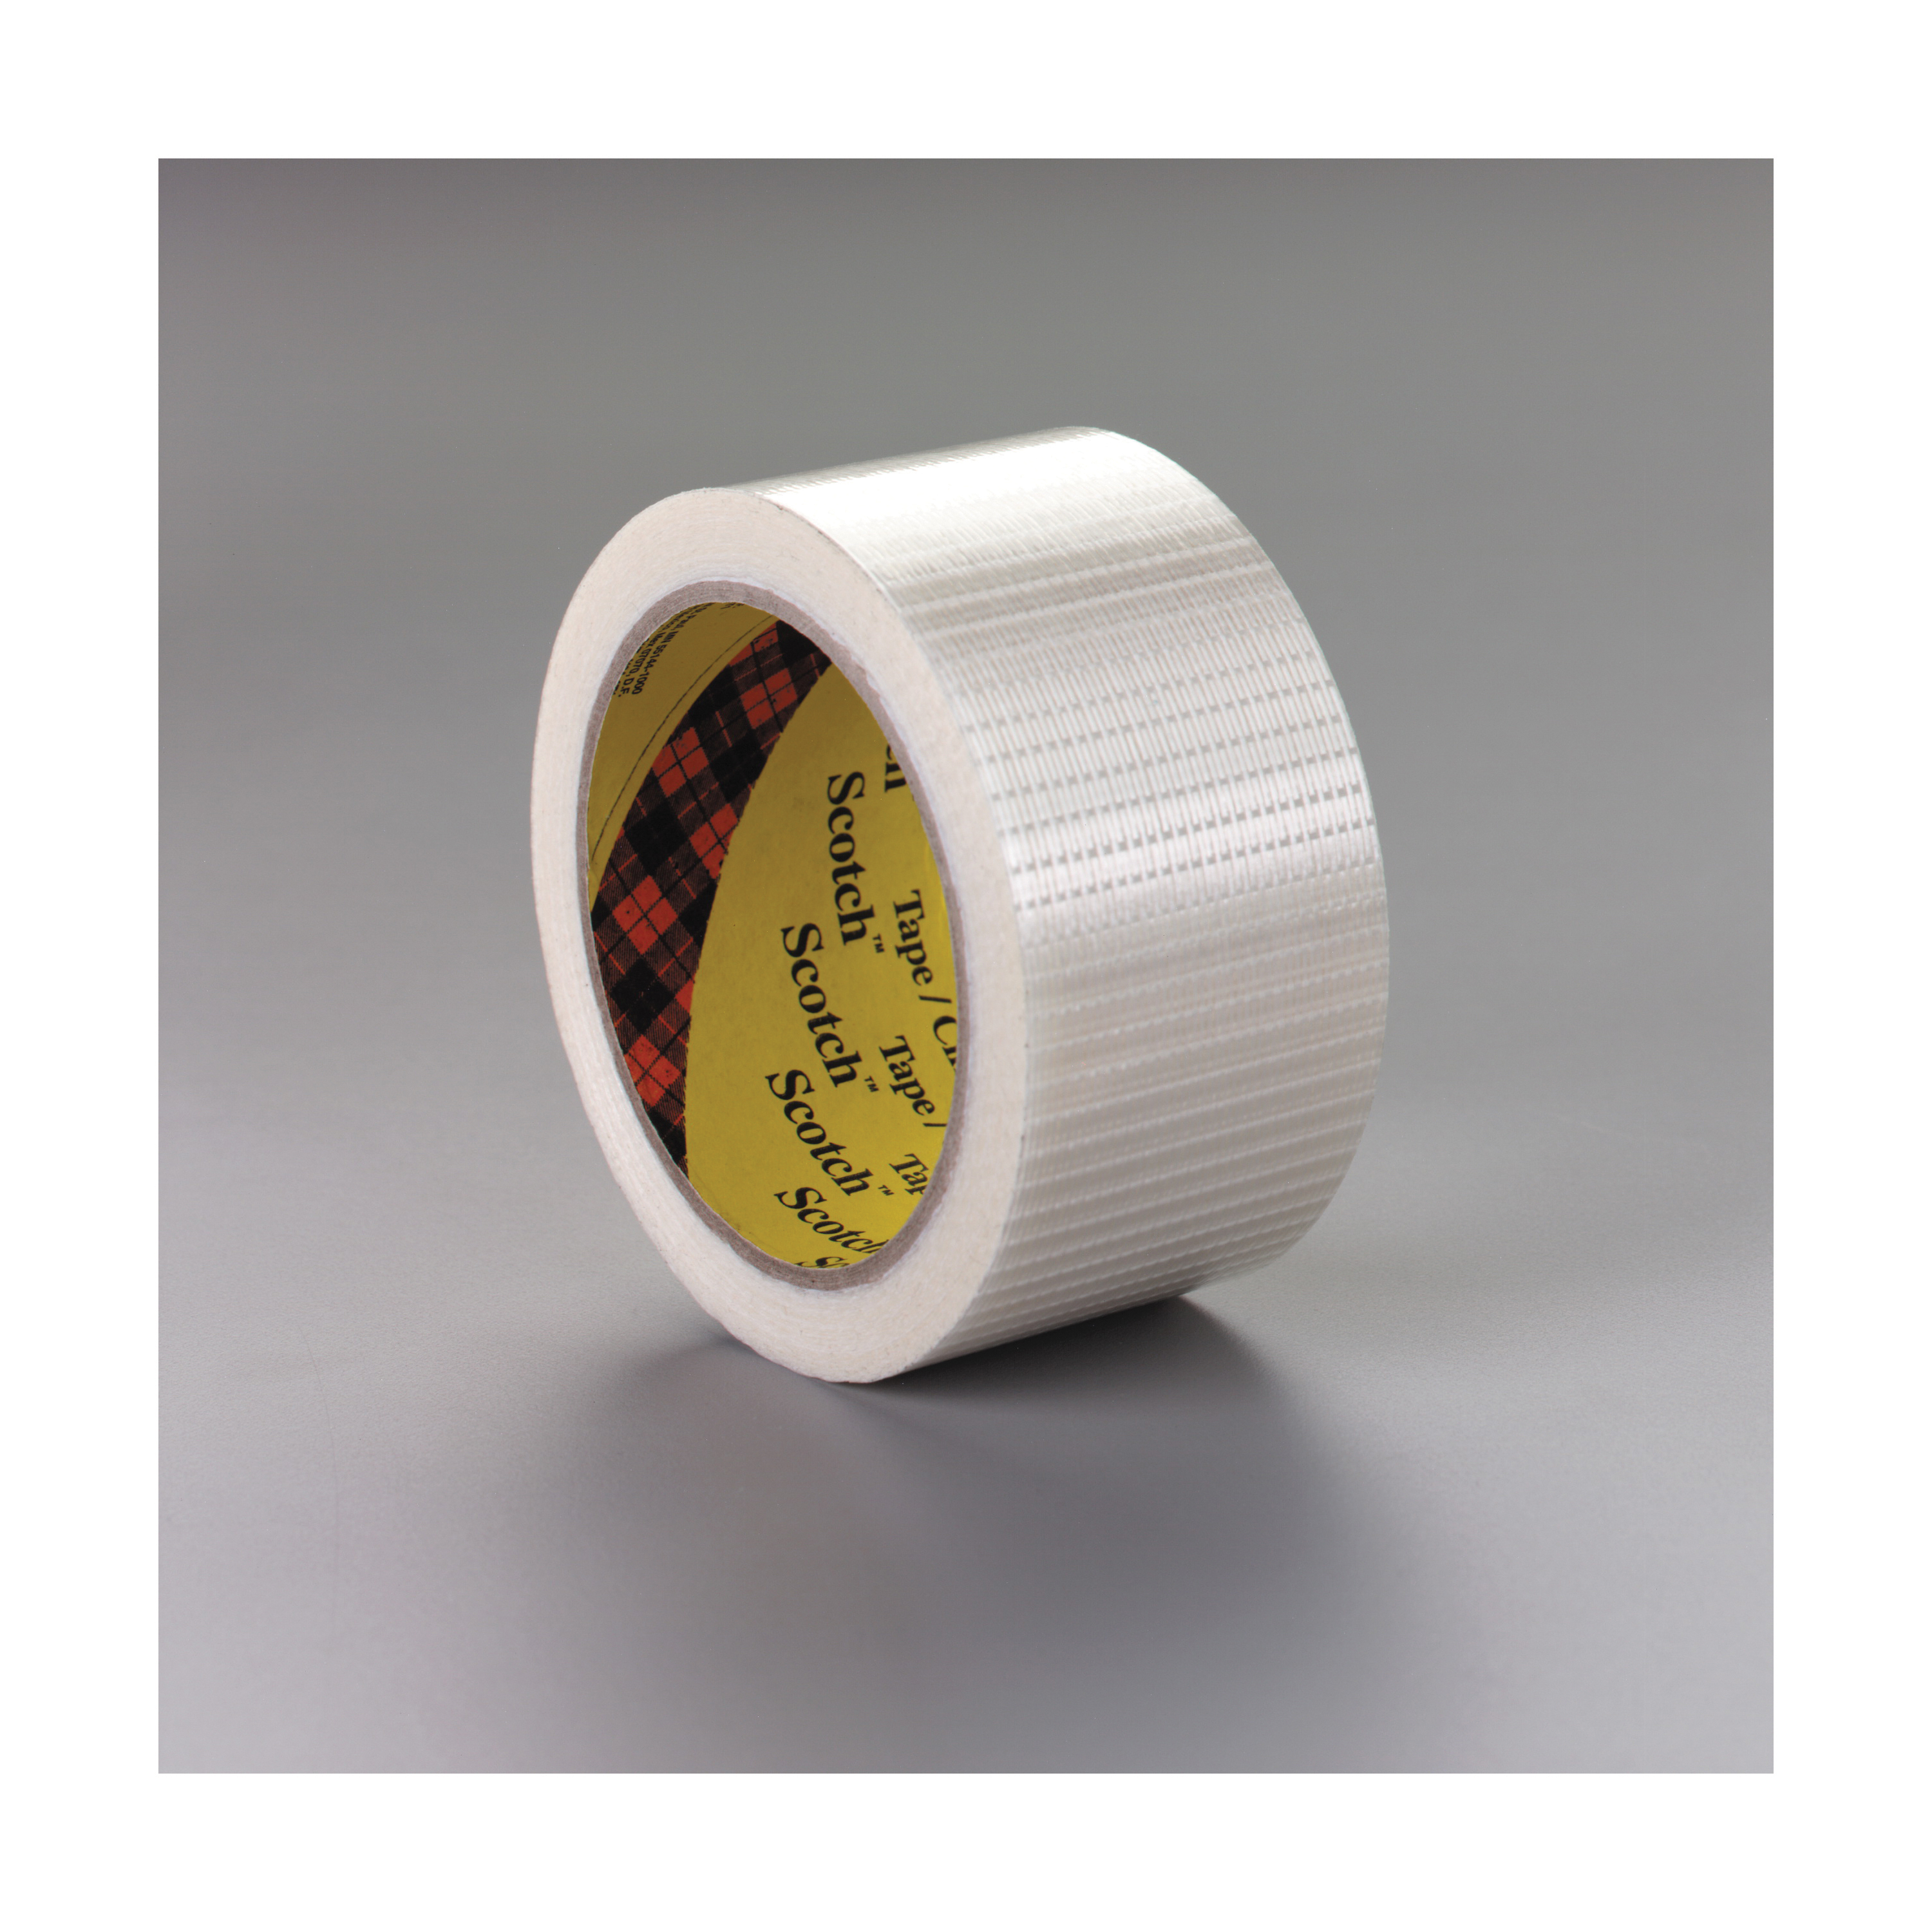 Scotch® 021200-39838 Filament Tape, 55 m L x 12 mm W, 8 mil THK, Glass Filament, Natural Rubber Adhesive, Polyester Film Backing, Clear